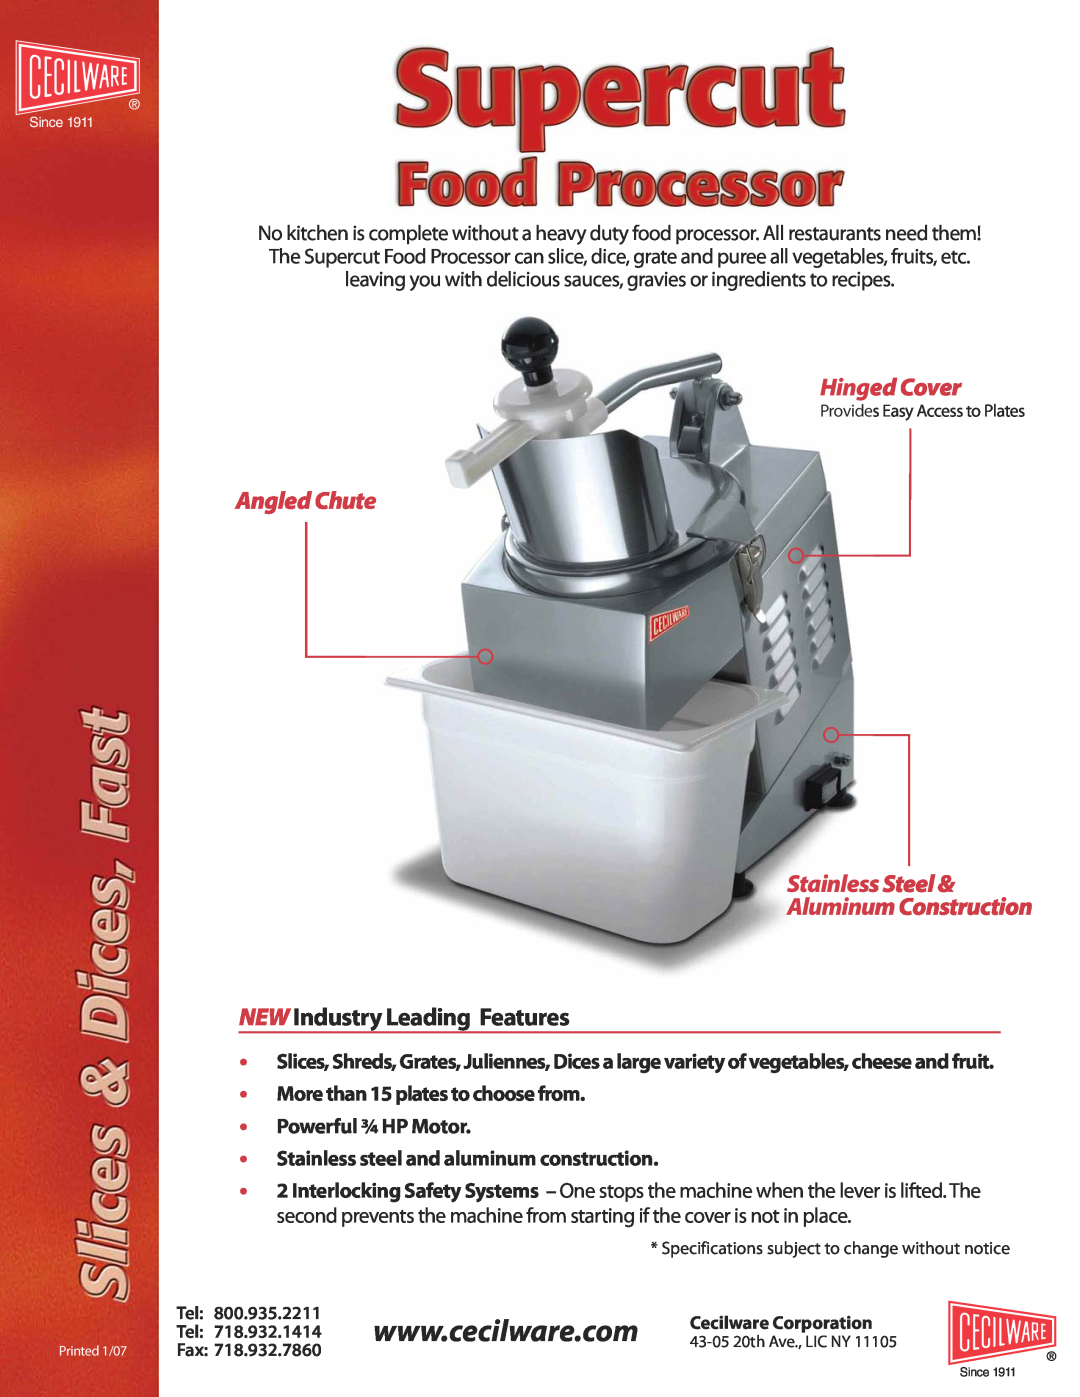 Cecilware Supercut Food Processor specifications Morethan15platestochoosefrom Powerful ¾ HPMotor, Hinged Cover, Tel, Fax 